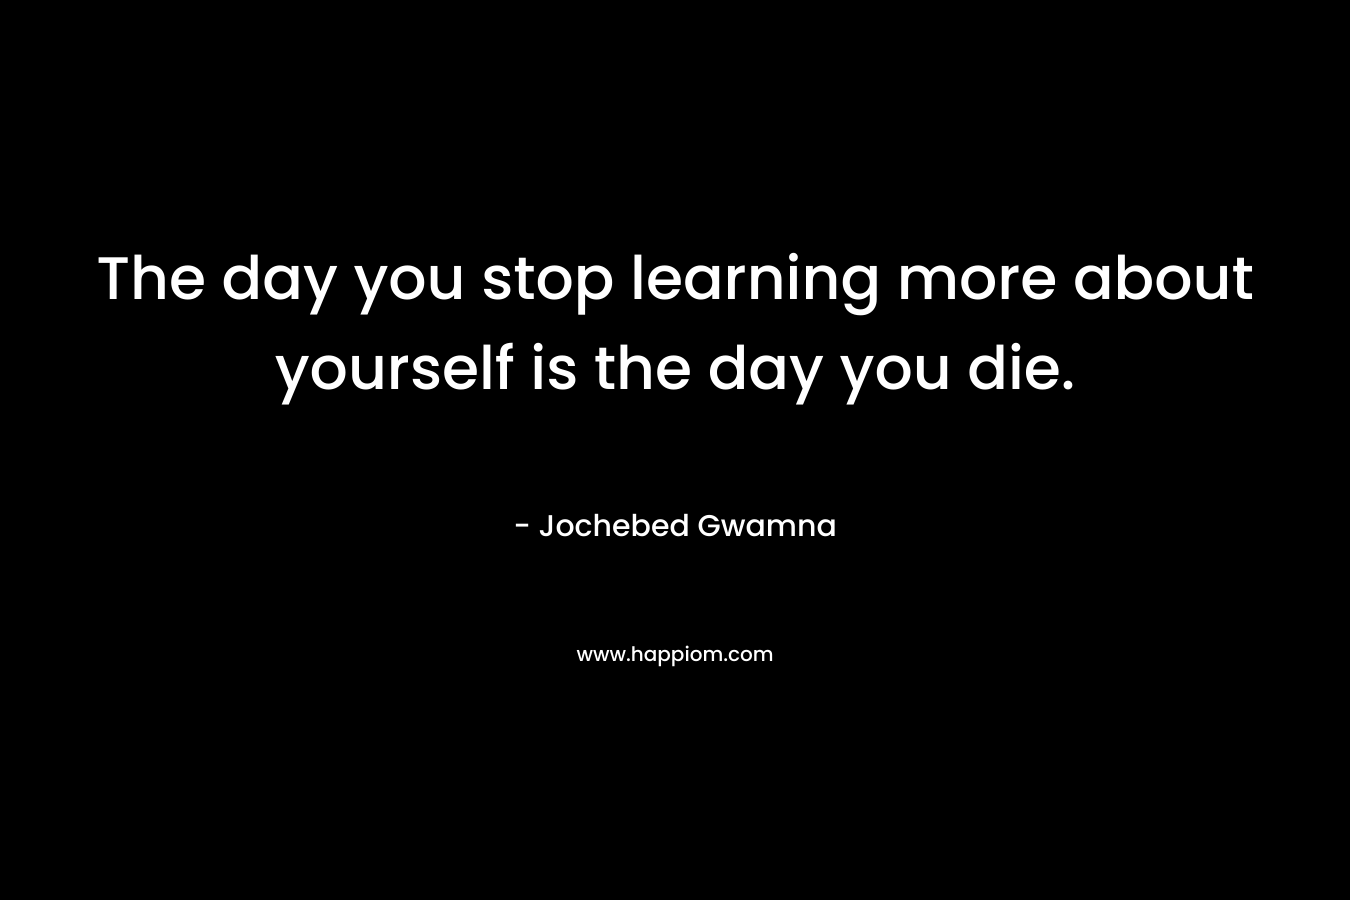 The day you stop learning more about yourself is the day you die. – Jochebed Gwamna